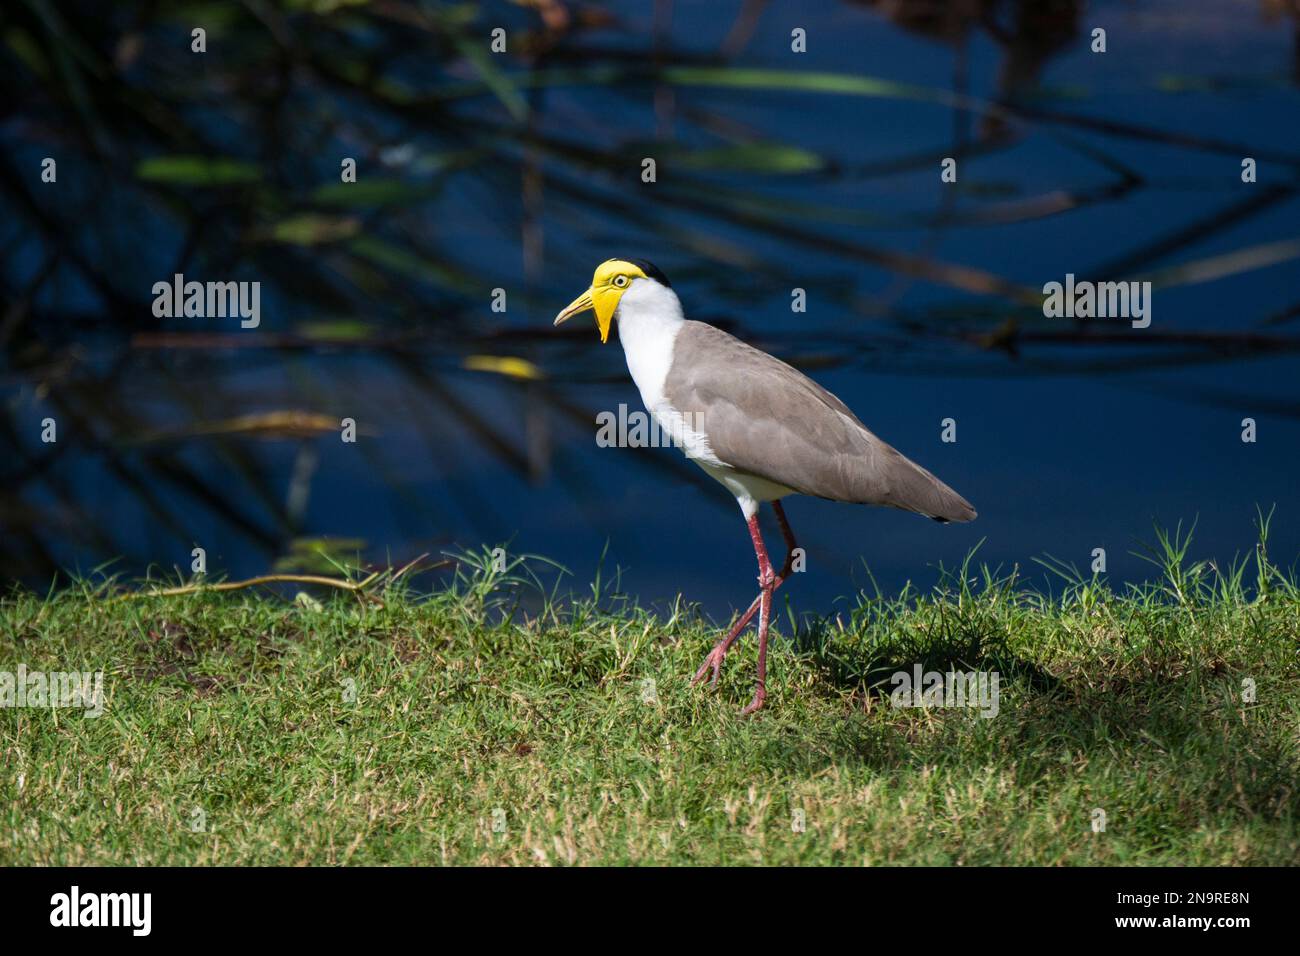 Portrait of the Masked lapwing (Vanellus miles) standing on grass in sunlight, previously known as the Masked plover and often called the Spur-wing... Stock Photo